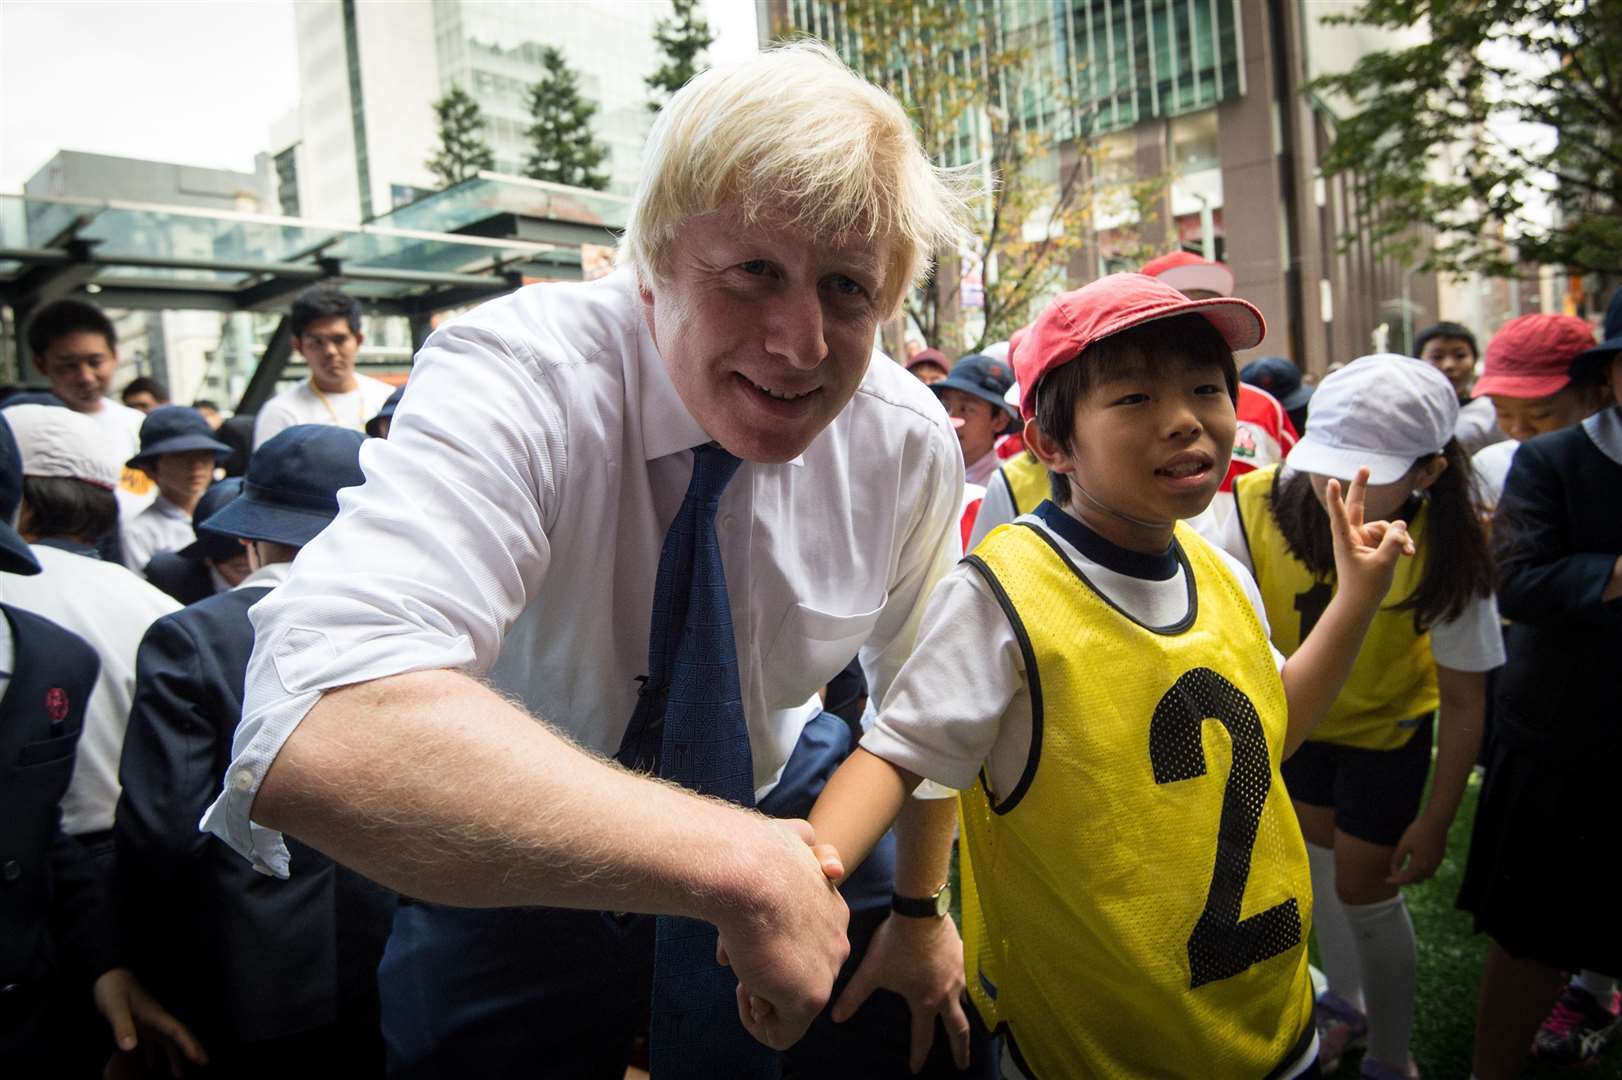 …Mr Johnson was later pictured shaking the hand of his fearless opponent 10-year-old Toki Sekiguchi (Stefan Rousseau/PA)